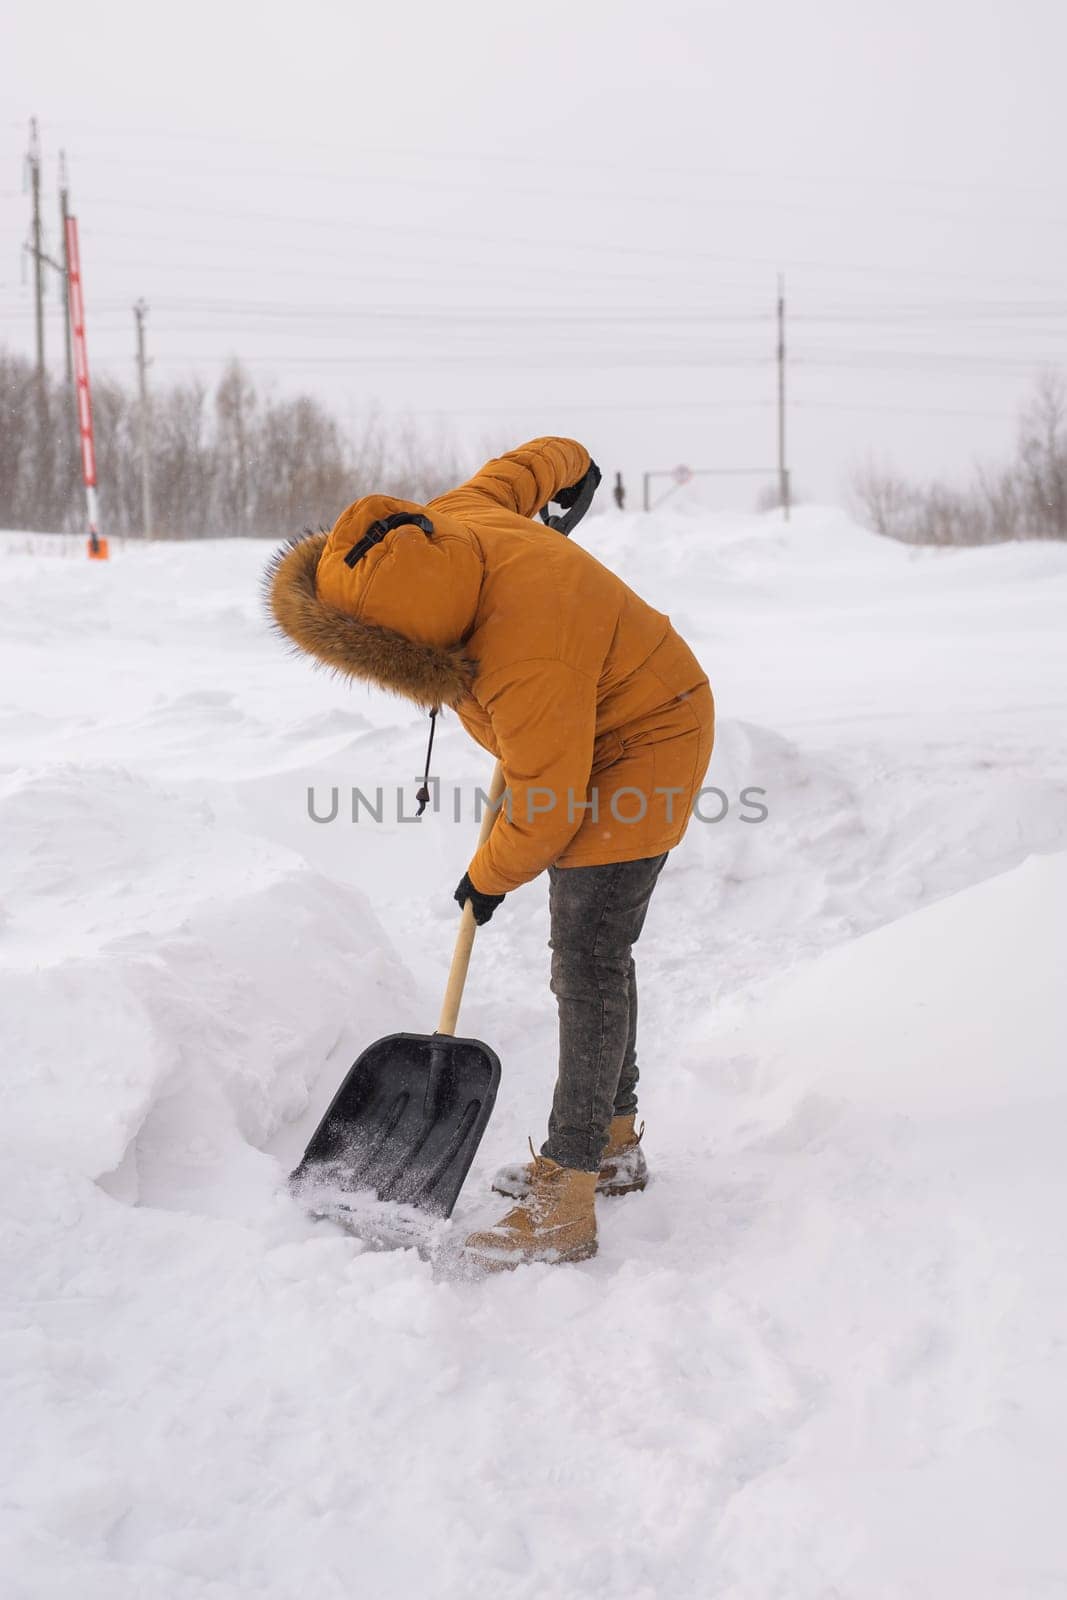 Man is clearing the snow near house and on staircases hovelling at the winter season. Winter storm and season specific by Satura86